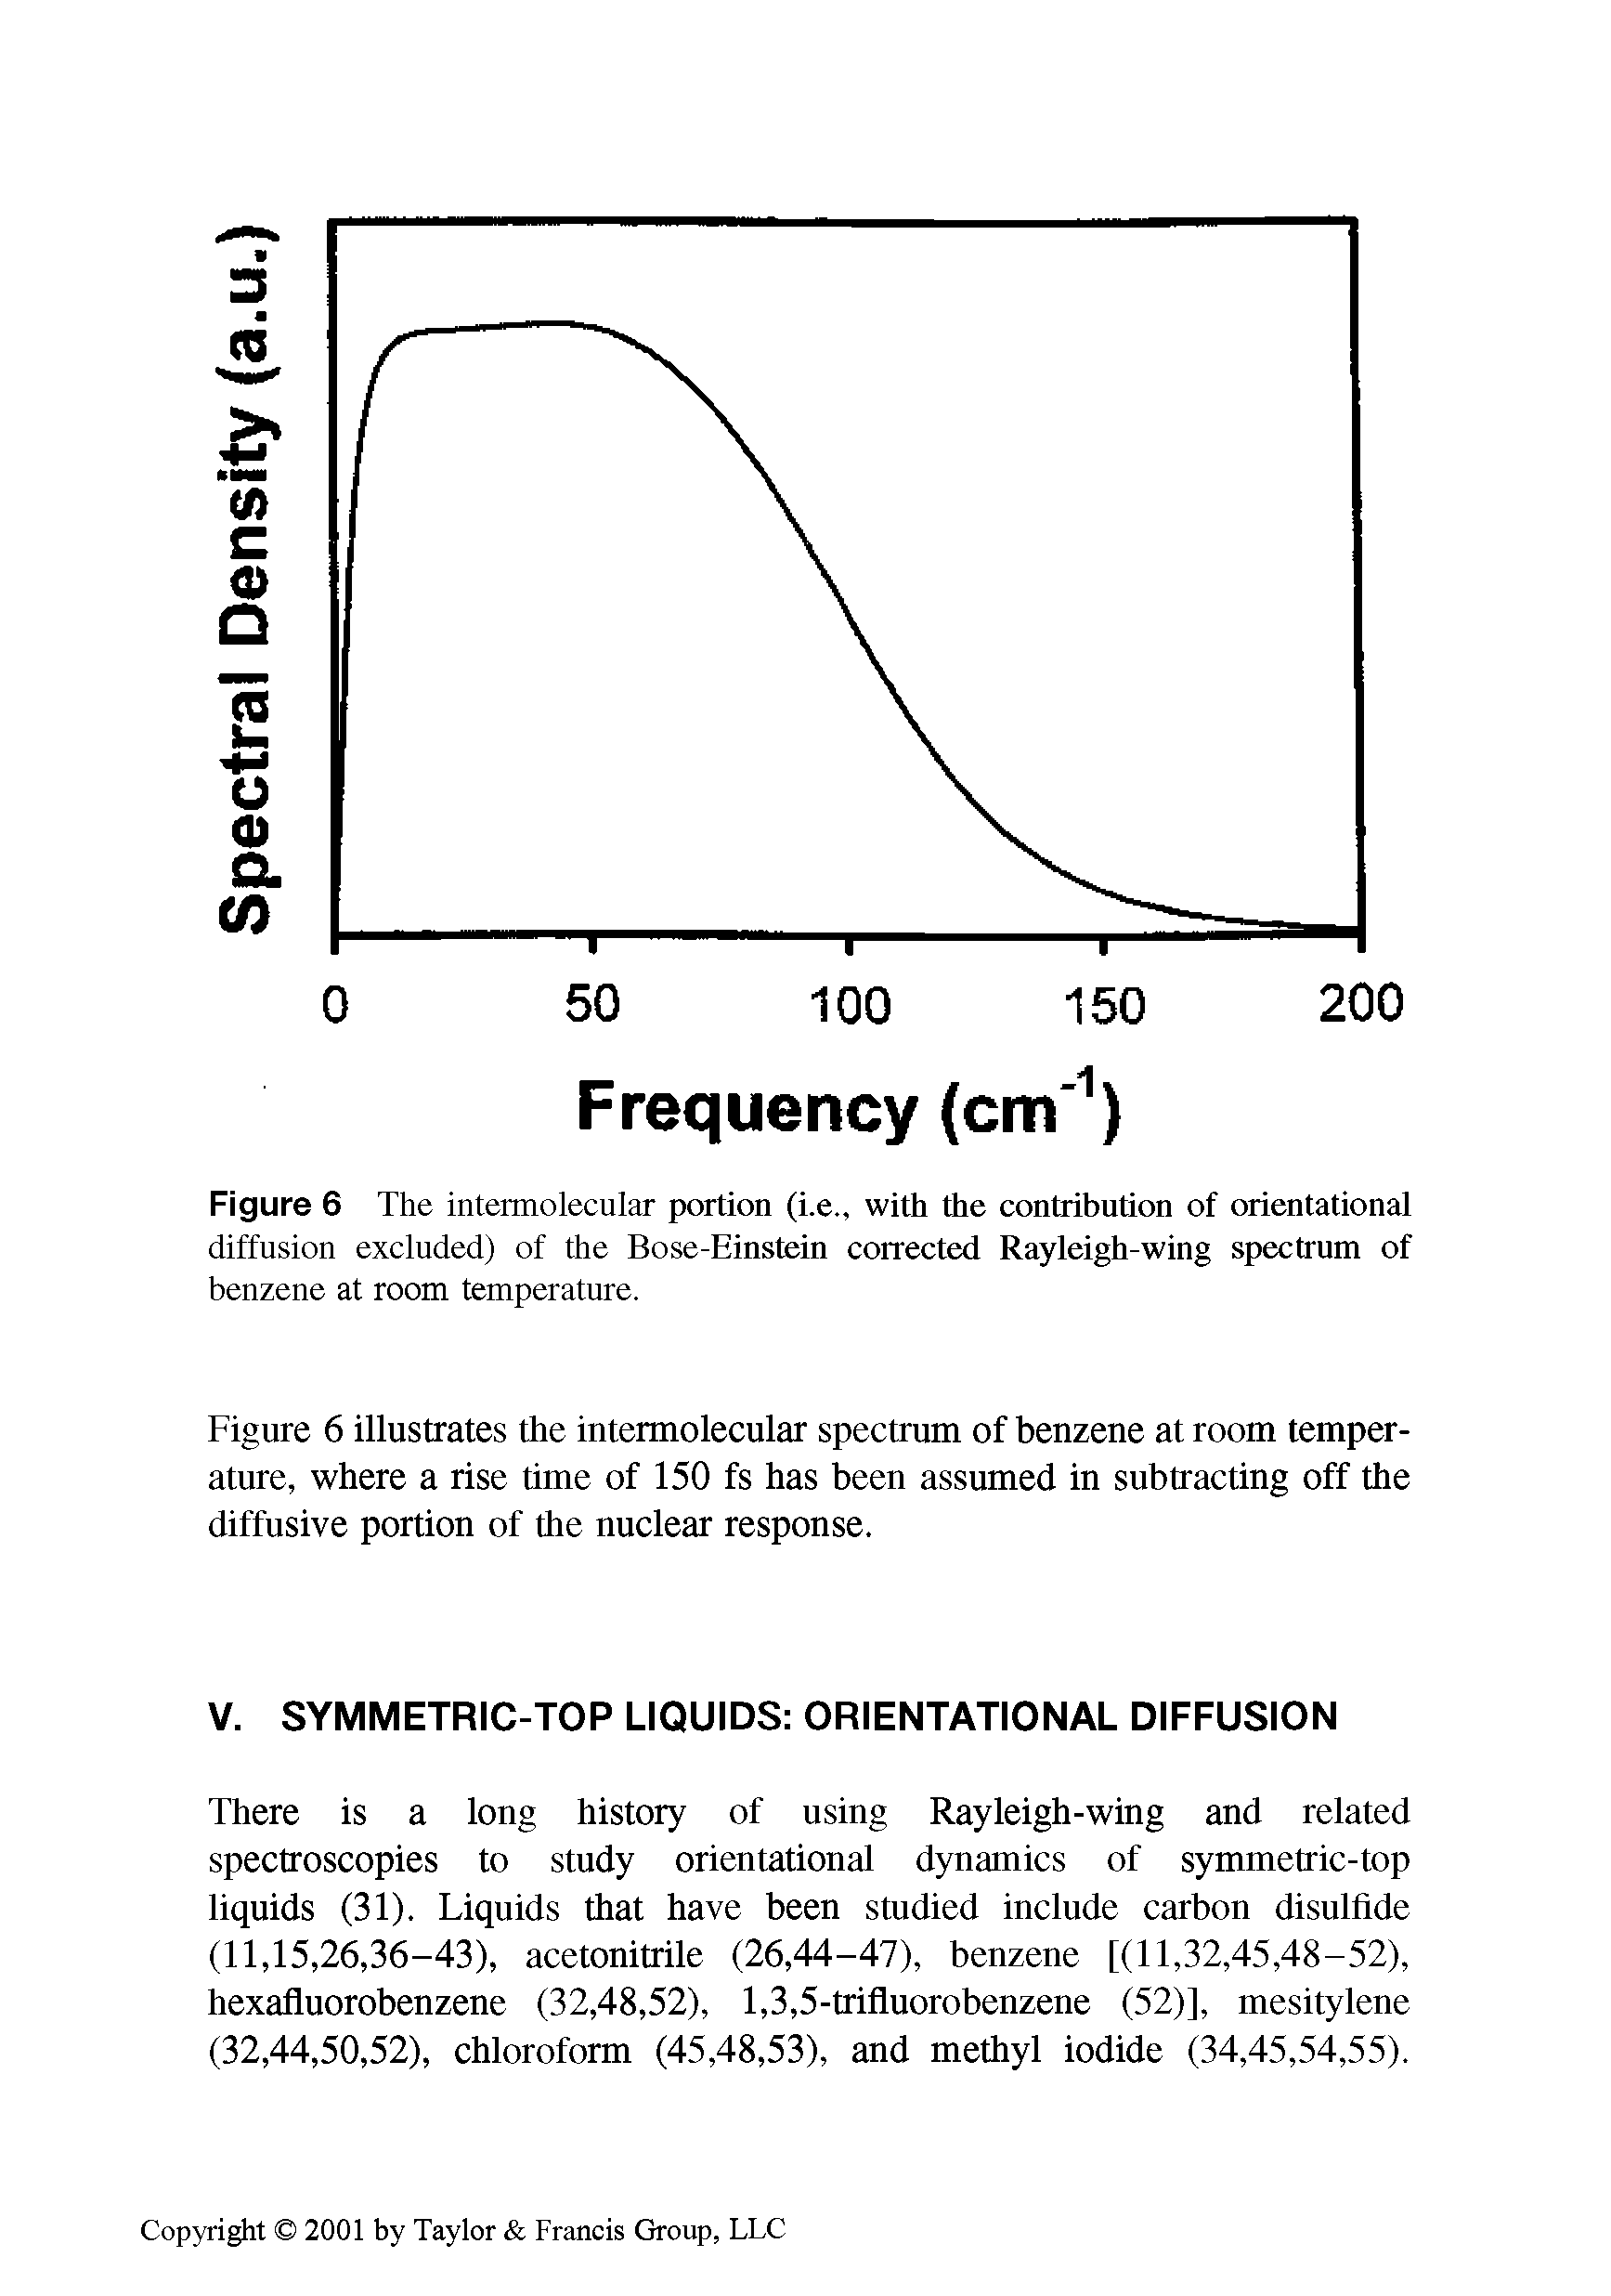 Figure 6 The intermolecular portion (i.e., with the contribution of orientational diffusion excluded) of the Bose-Einstein corrected Rayleigh-wing spectrum of benzene at room temperature.